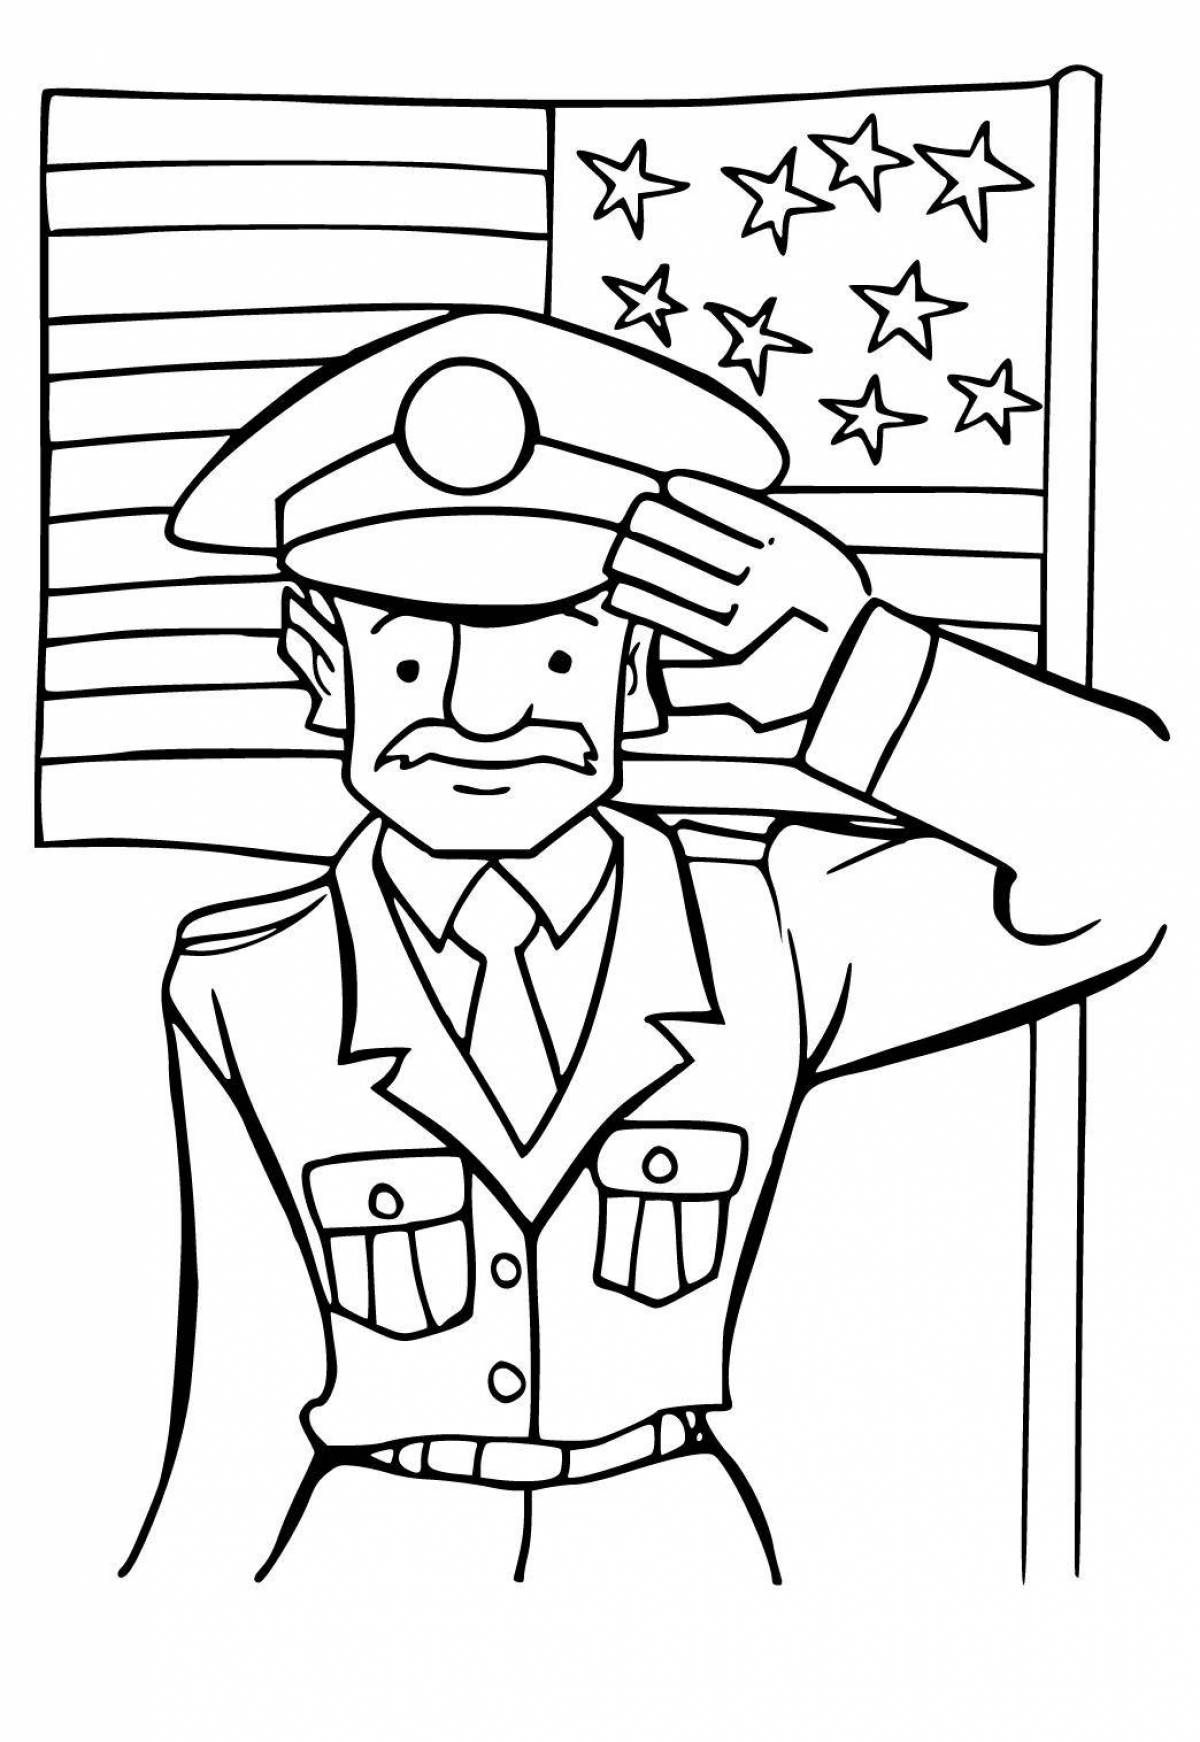 Coloring book decisive heroes of the second world war